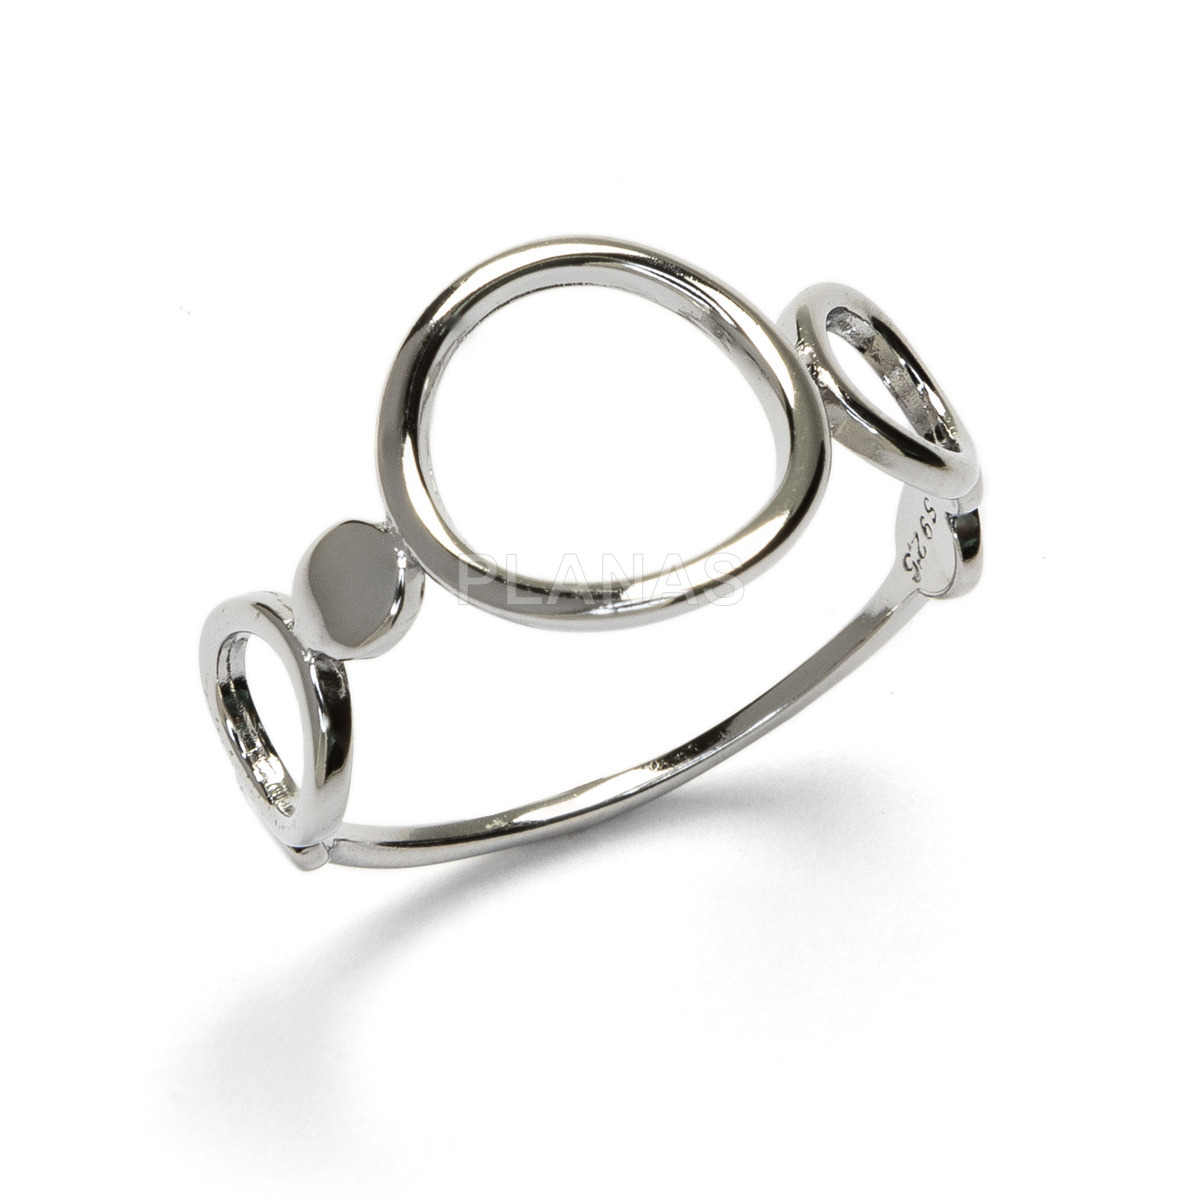 Rhodium-plated sterling silver ring.